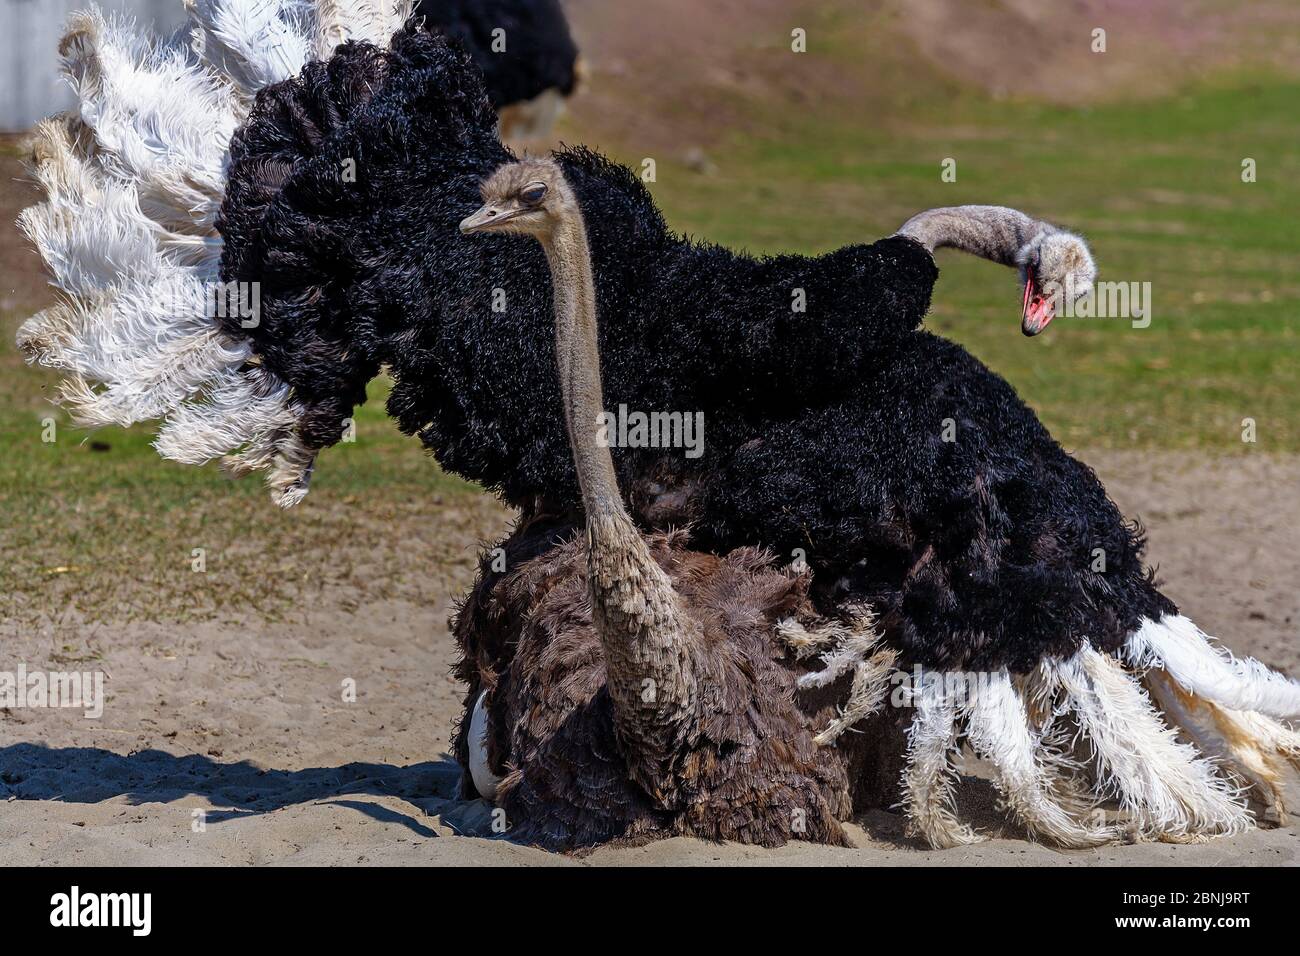 A large black EMU ostrich with a long neck has spread its wings and is mating with a female. Mating period in animals Stock Photo